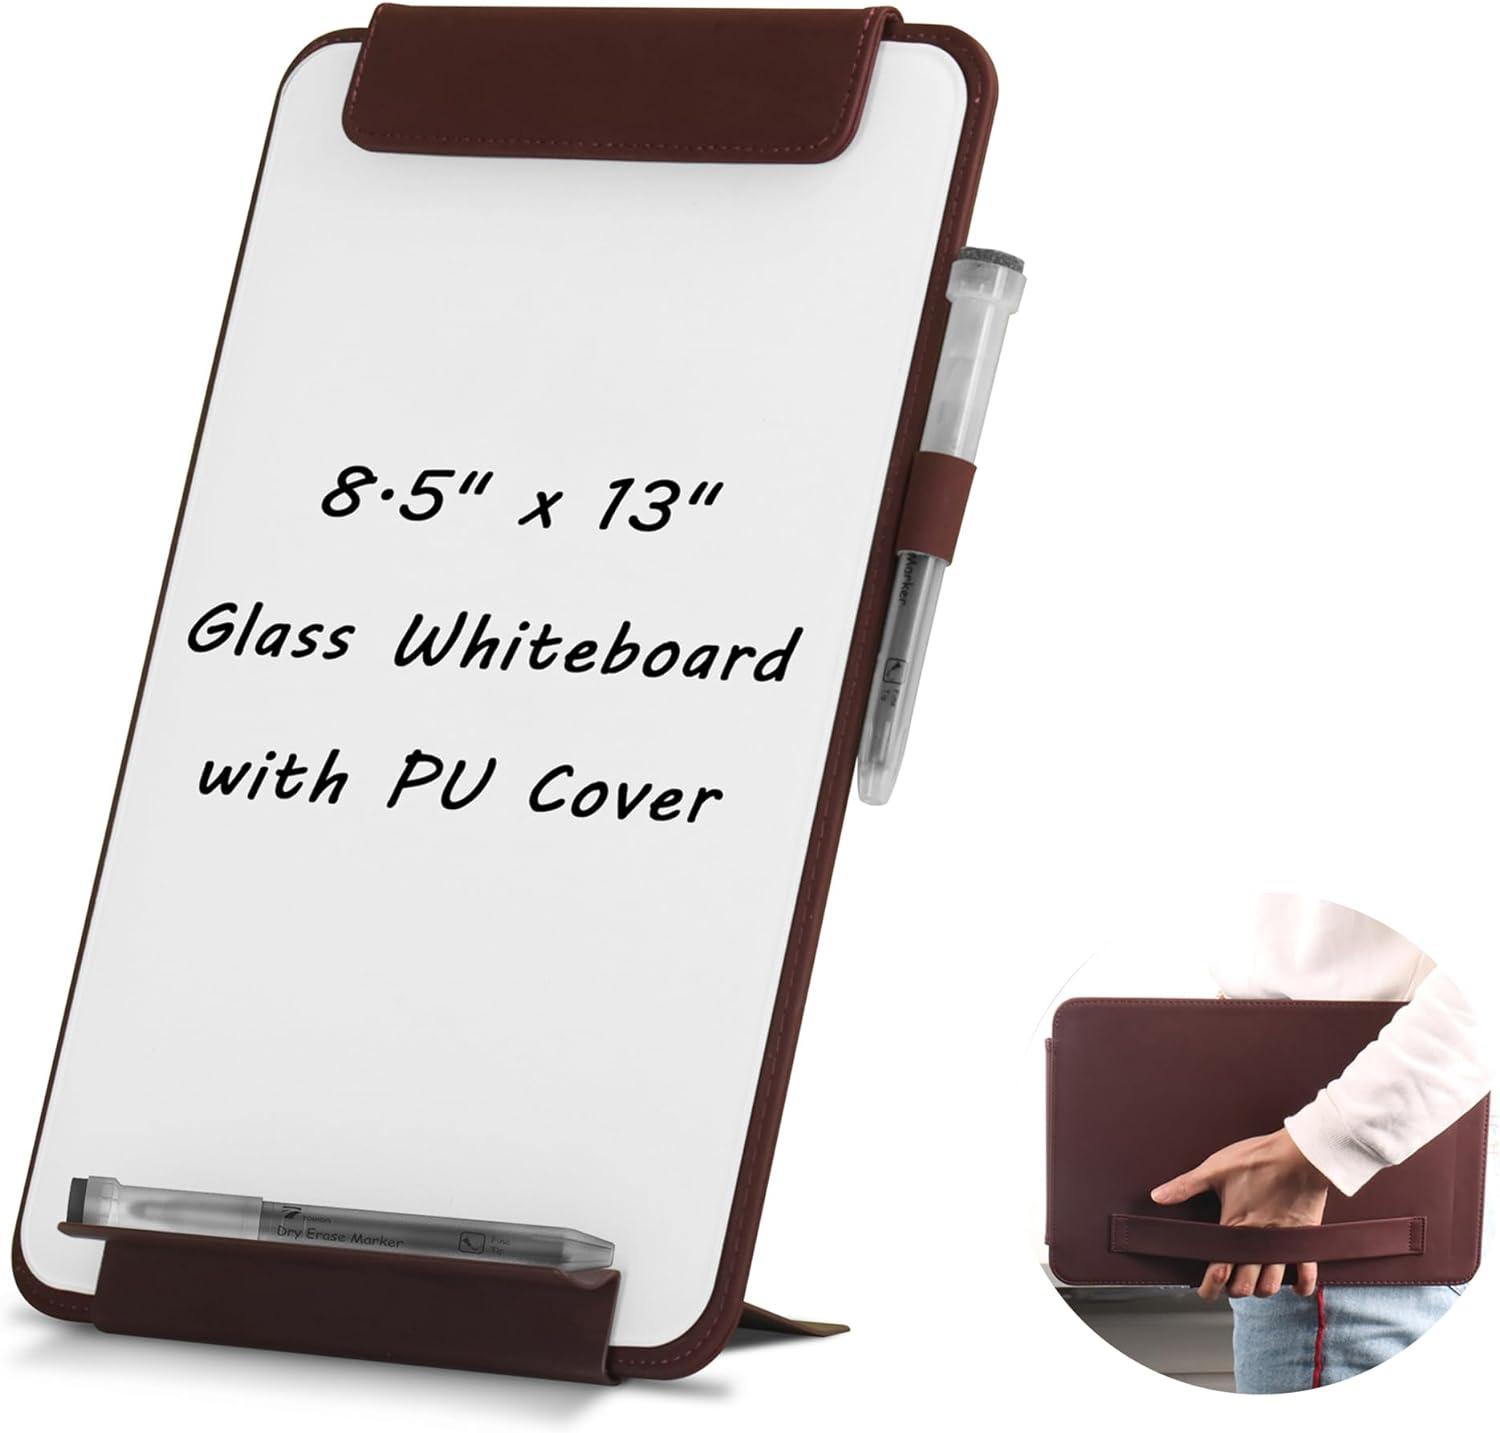 selead desktop glass whiteboard standing or handheld dry erase white board markers for home office school 